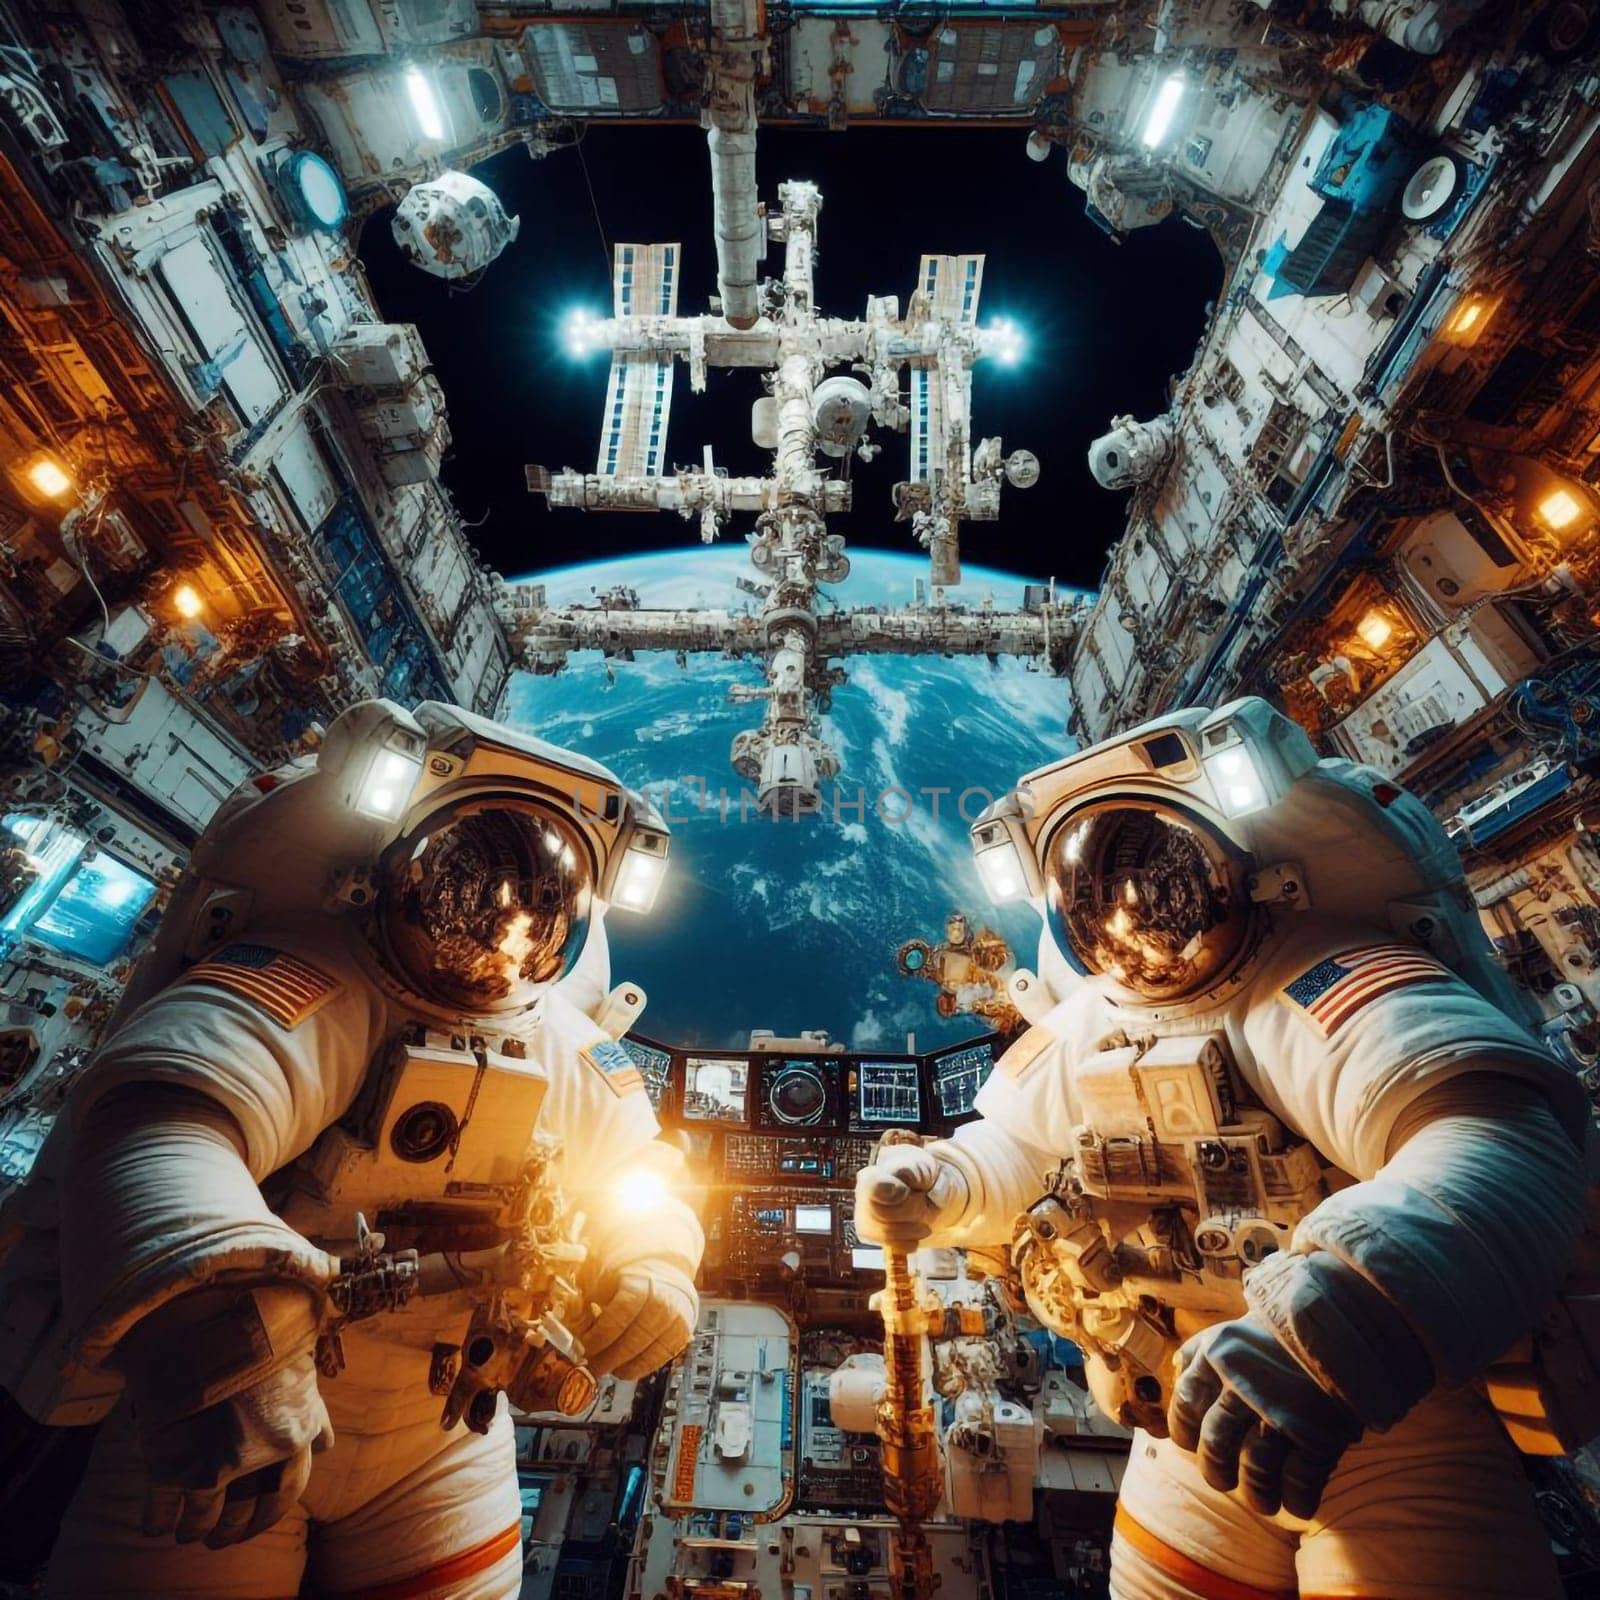 Two Astronauts in Spacesuits on an Space Station. Space Travel and Solar System Colonization Concept